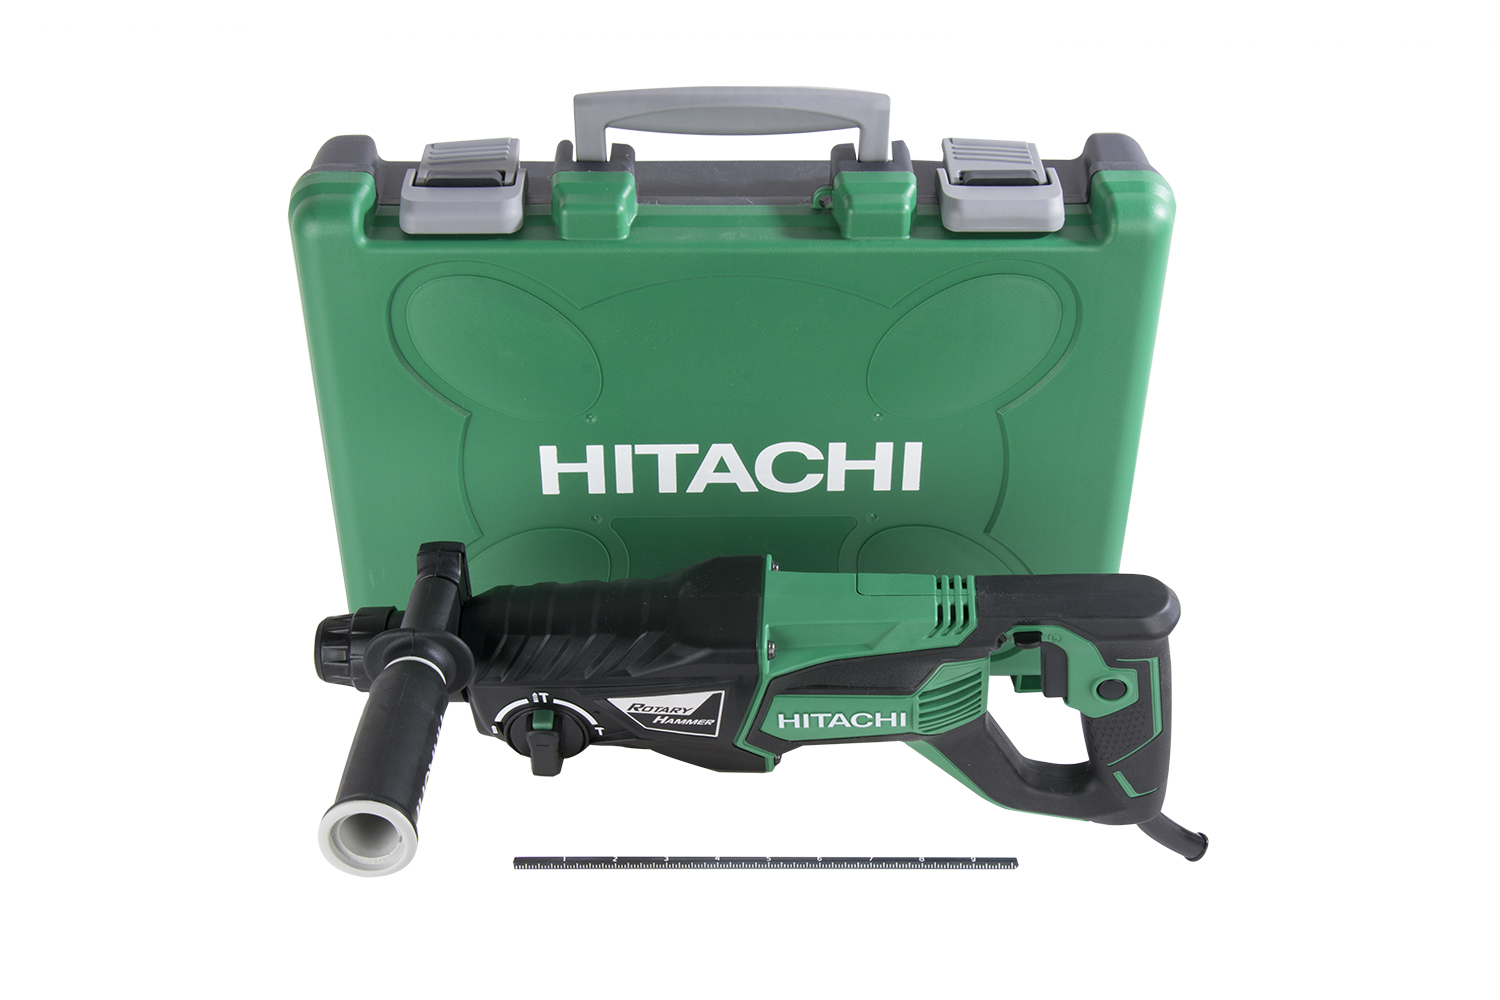 Hitachi Power Tools announced additions to its growing commercial product line with the launch two new SDS Plus Rotary Hammers; the DH26PF & the DH28PFY with User Vibration Protection.